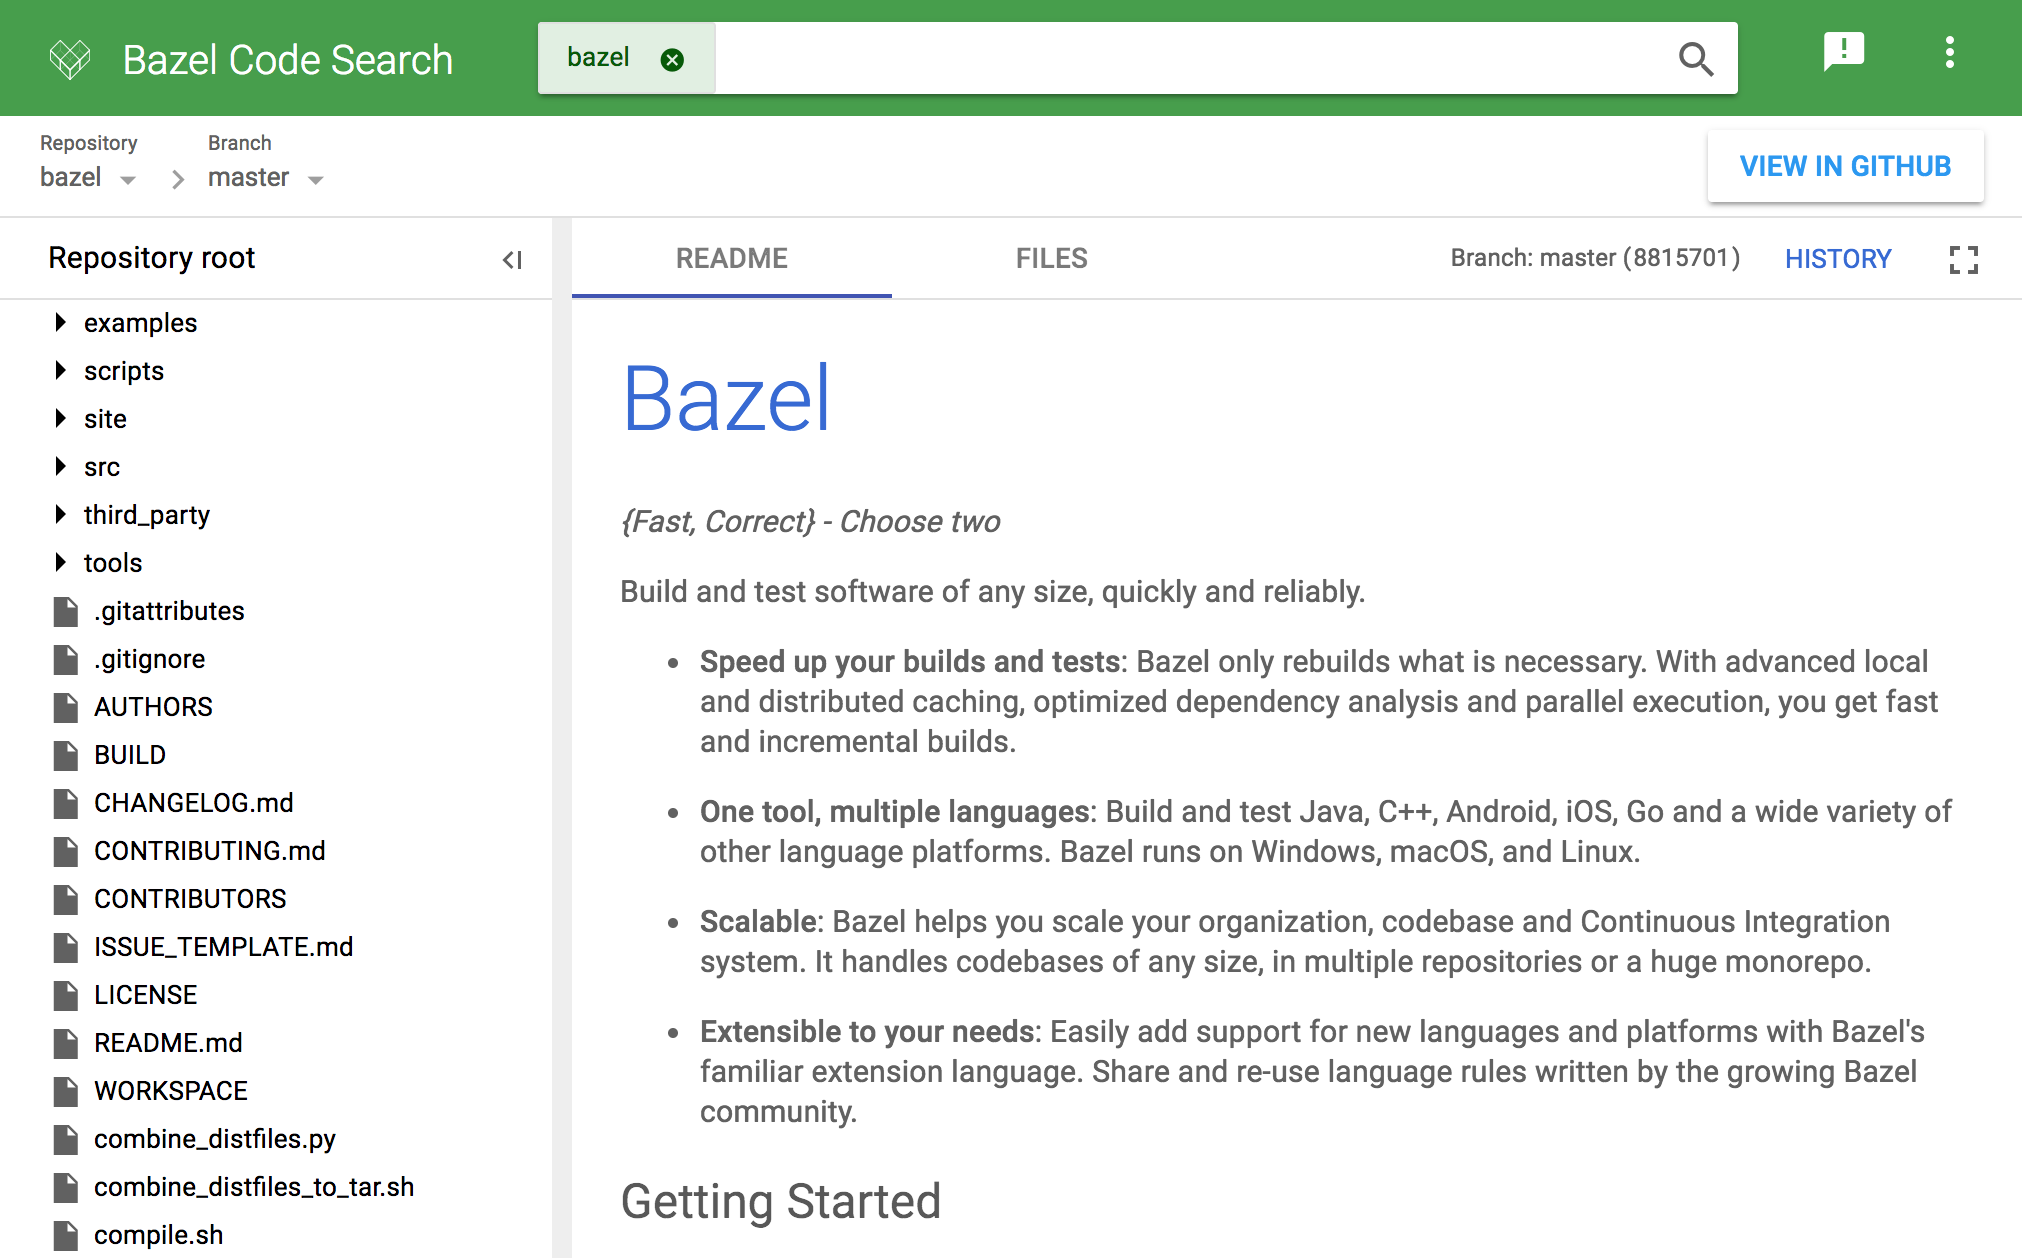 Repository view on Bazel Code Search